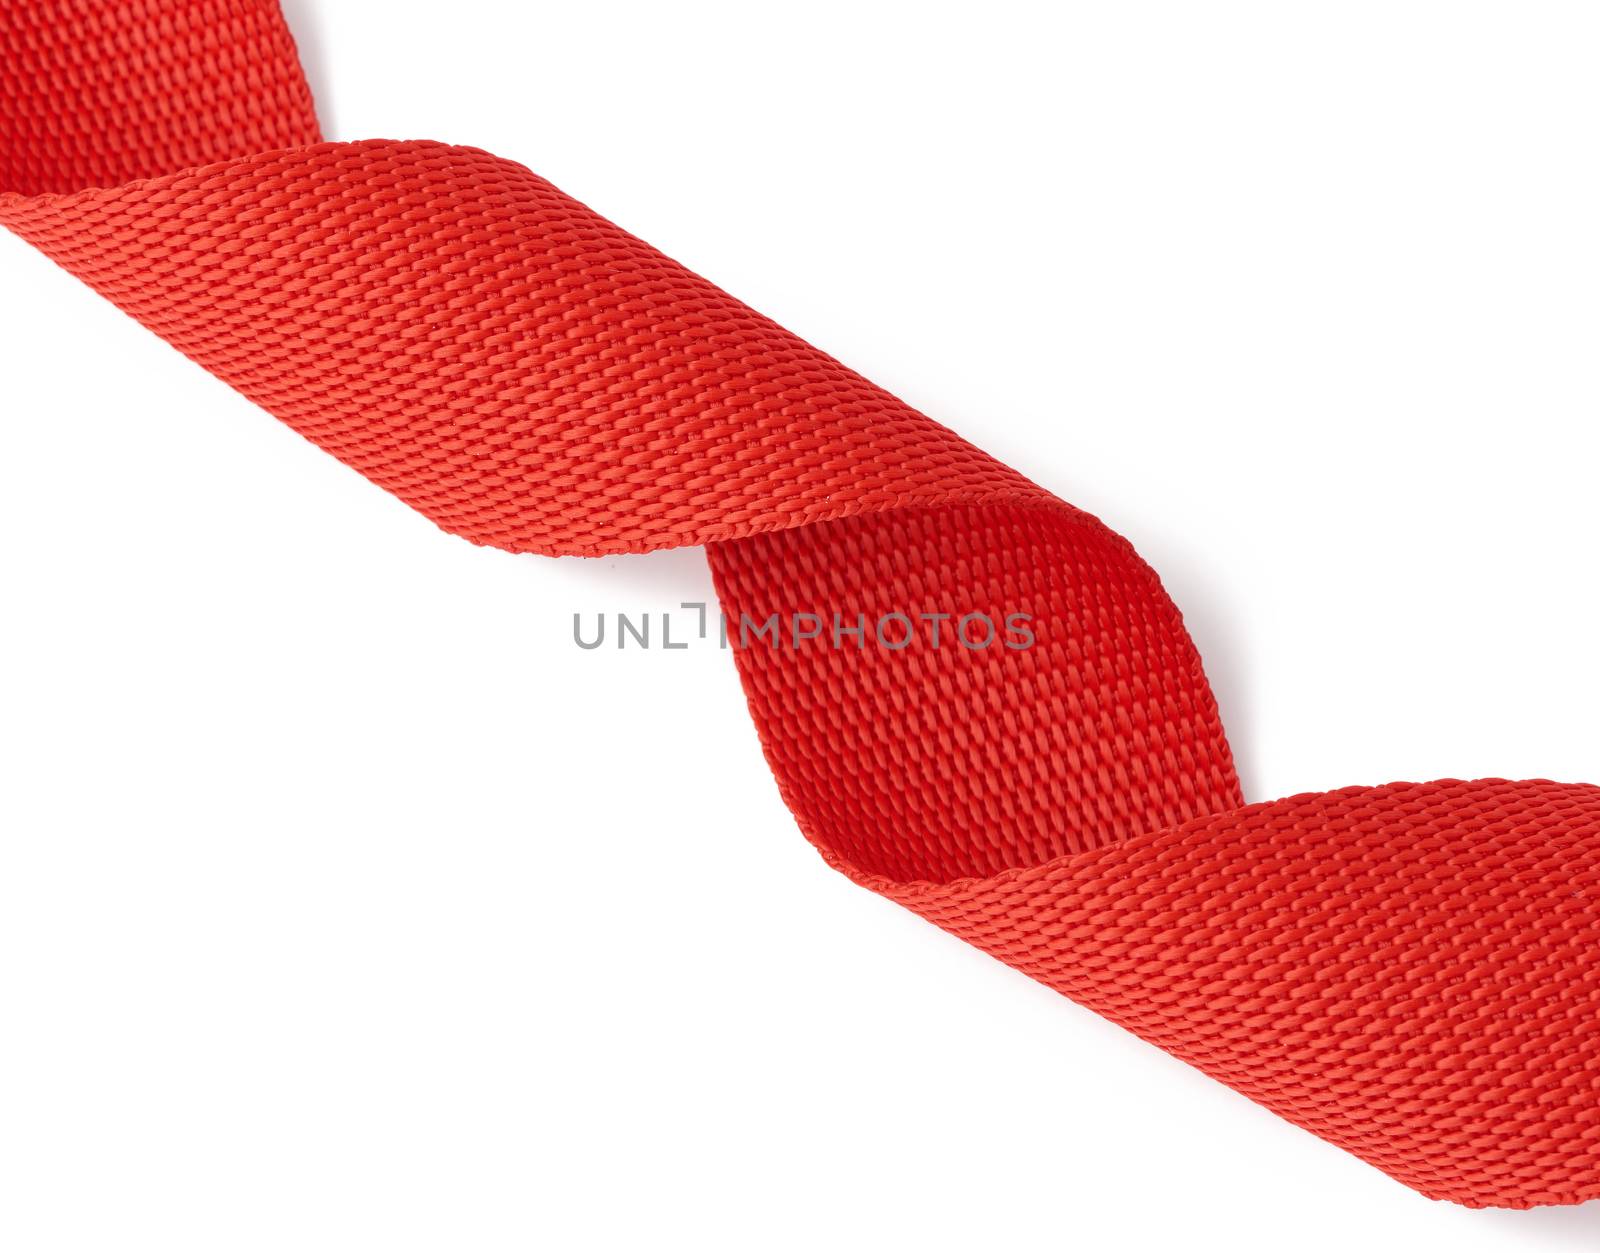 twisted red textile tape for belts and handles of bags by ndanko